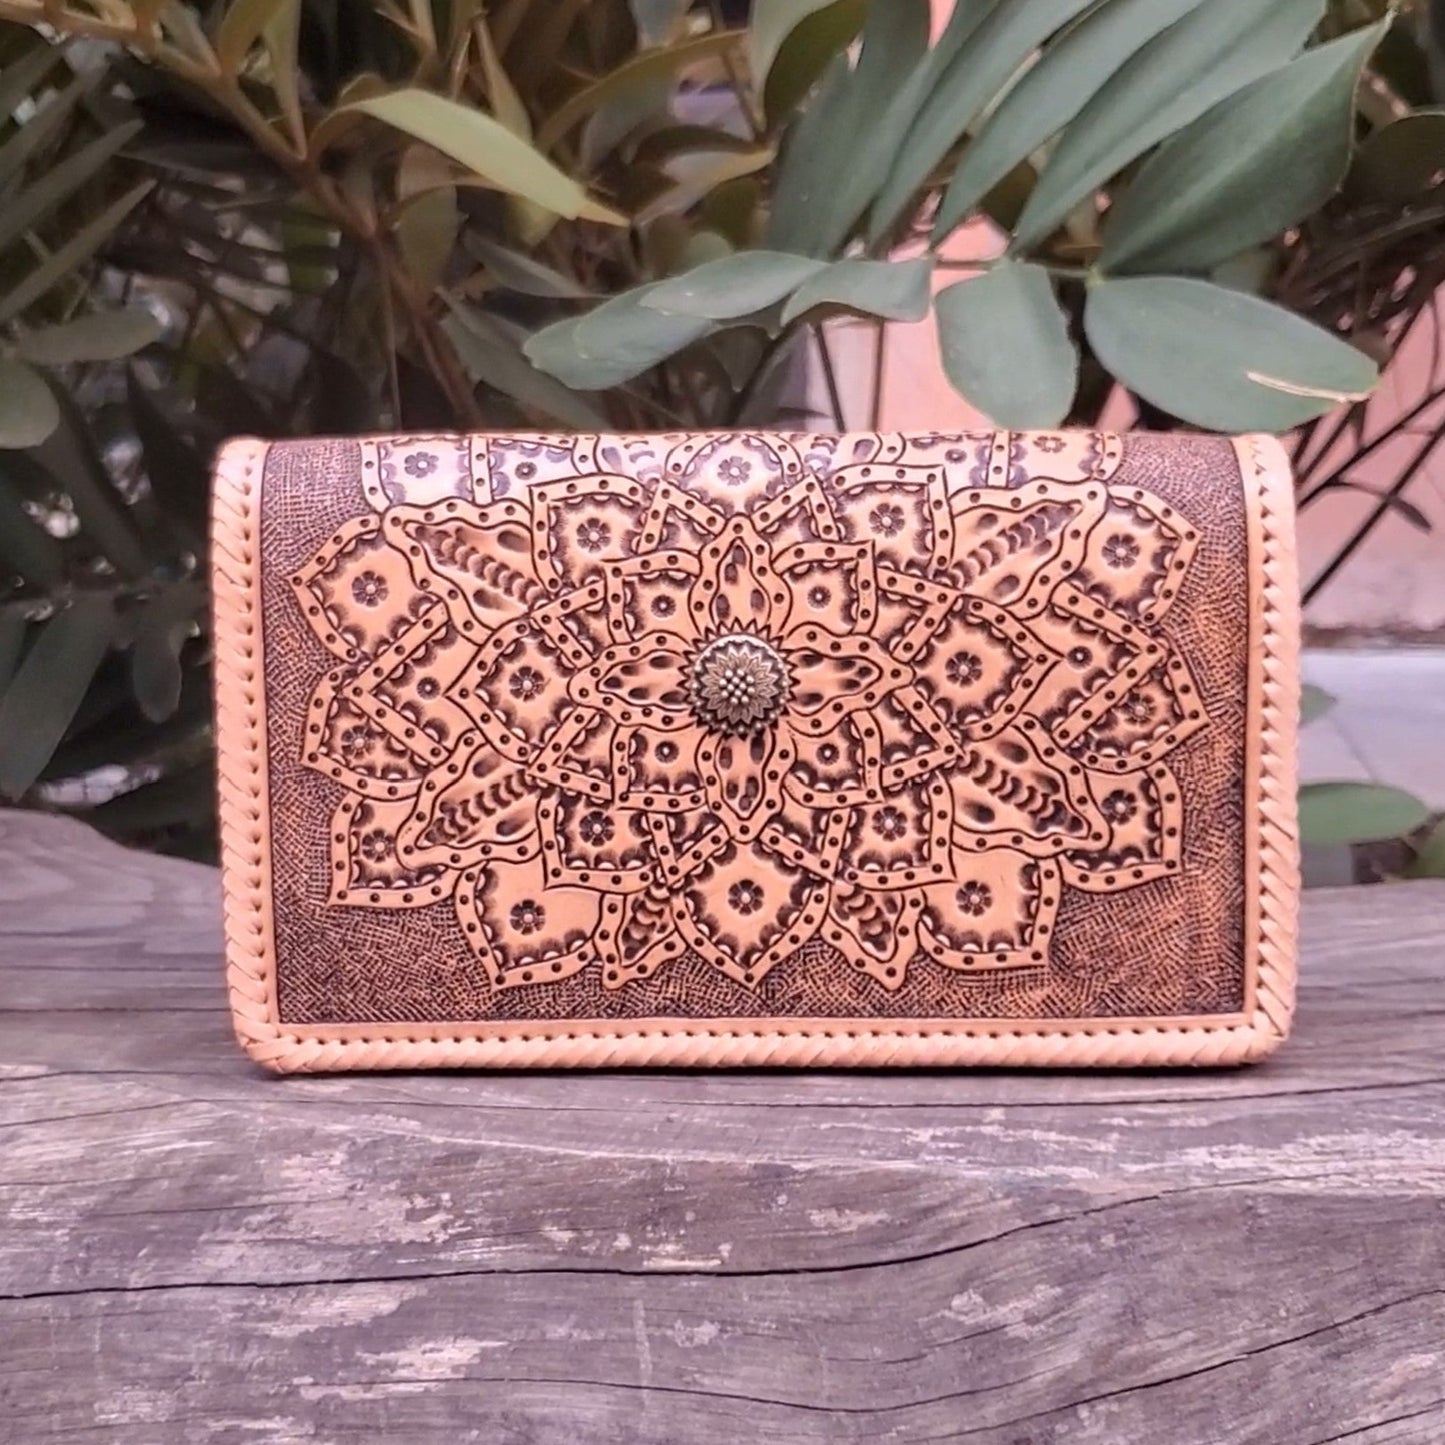 Hand Made Leather Crossbody Bag "CECELIA" by MIOHERMOSA Natural Cecilia Flower